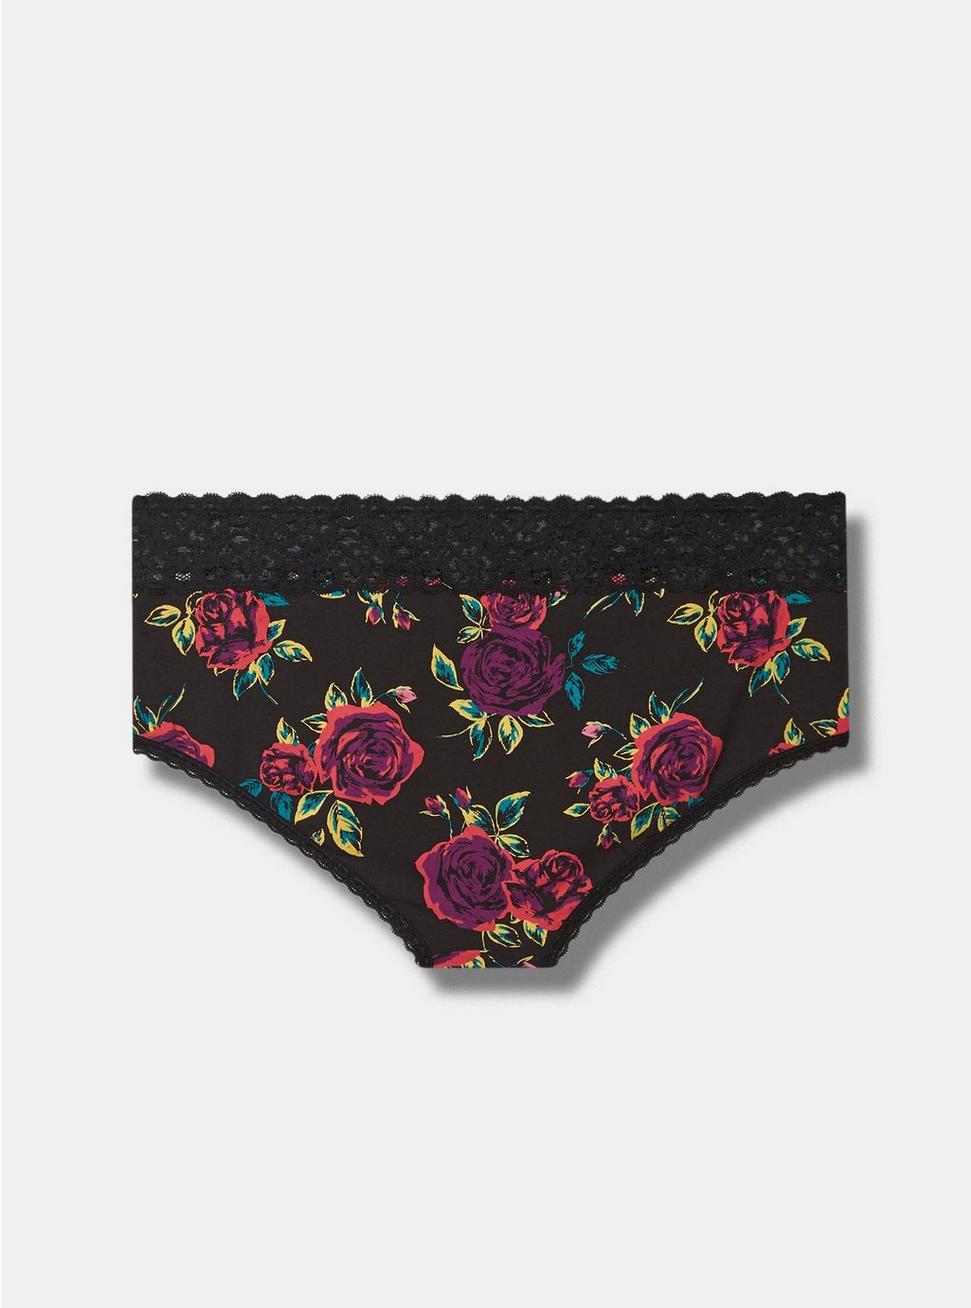 Cotton Mid-Rise Cheeky Lace Trim Panty, BRUSHED ROSES FLORAL BLACK, alternate